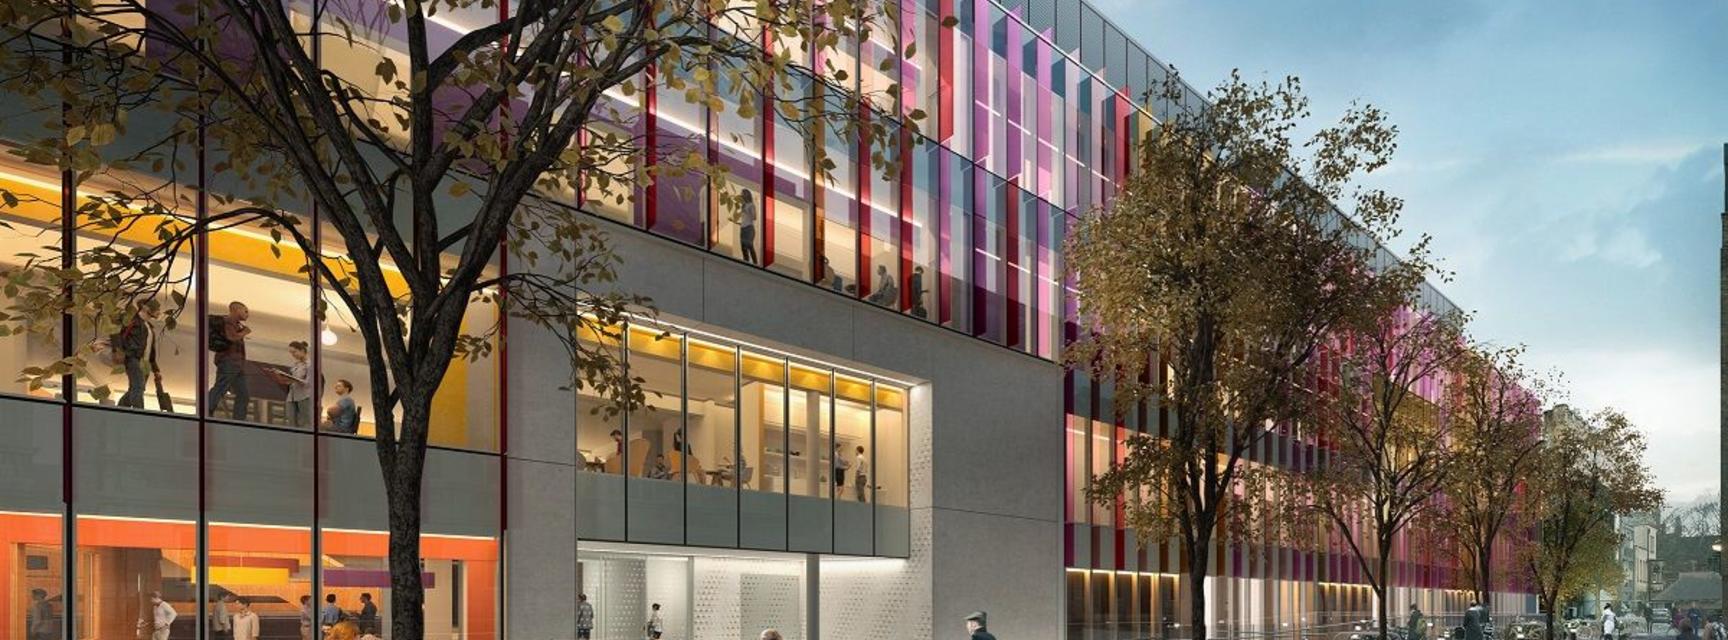 A Photograph of the New Biochemistry Building where Kavli Institute is located.